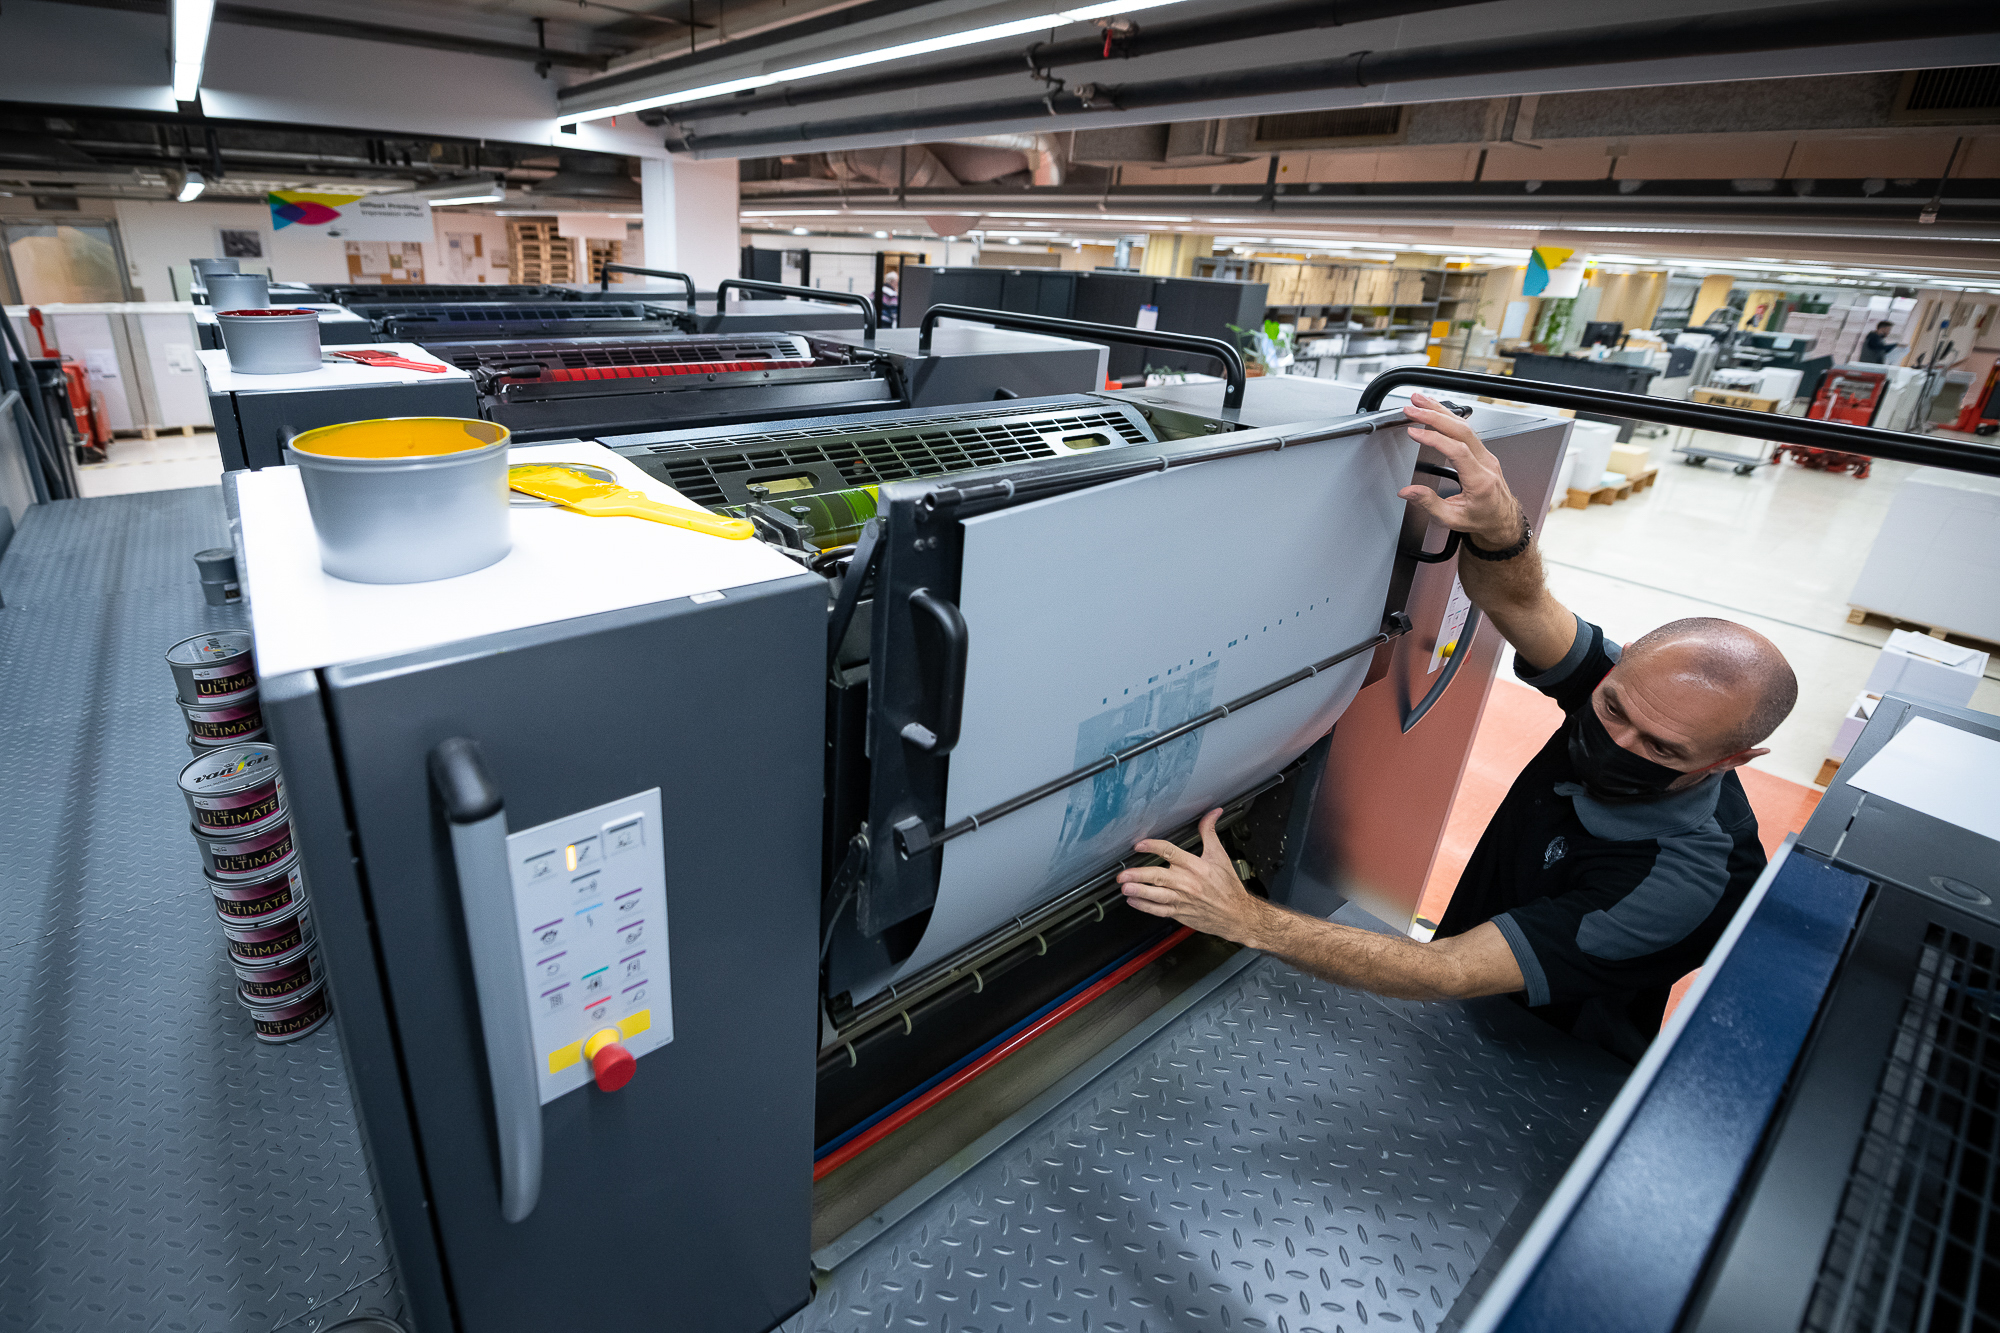 A photo taken from above of a man operating a large printing machine in an open space. He is looking at a large document on the printing machine.